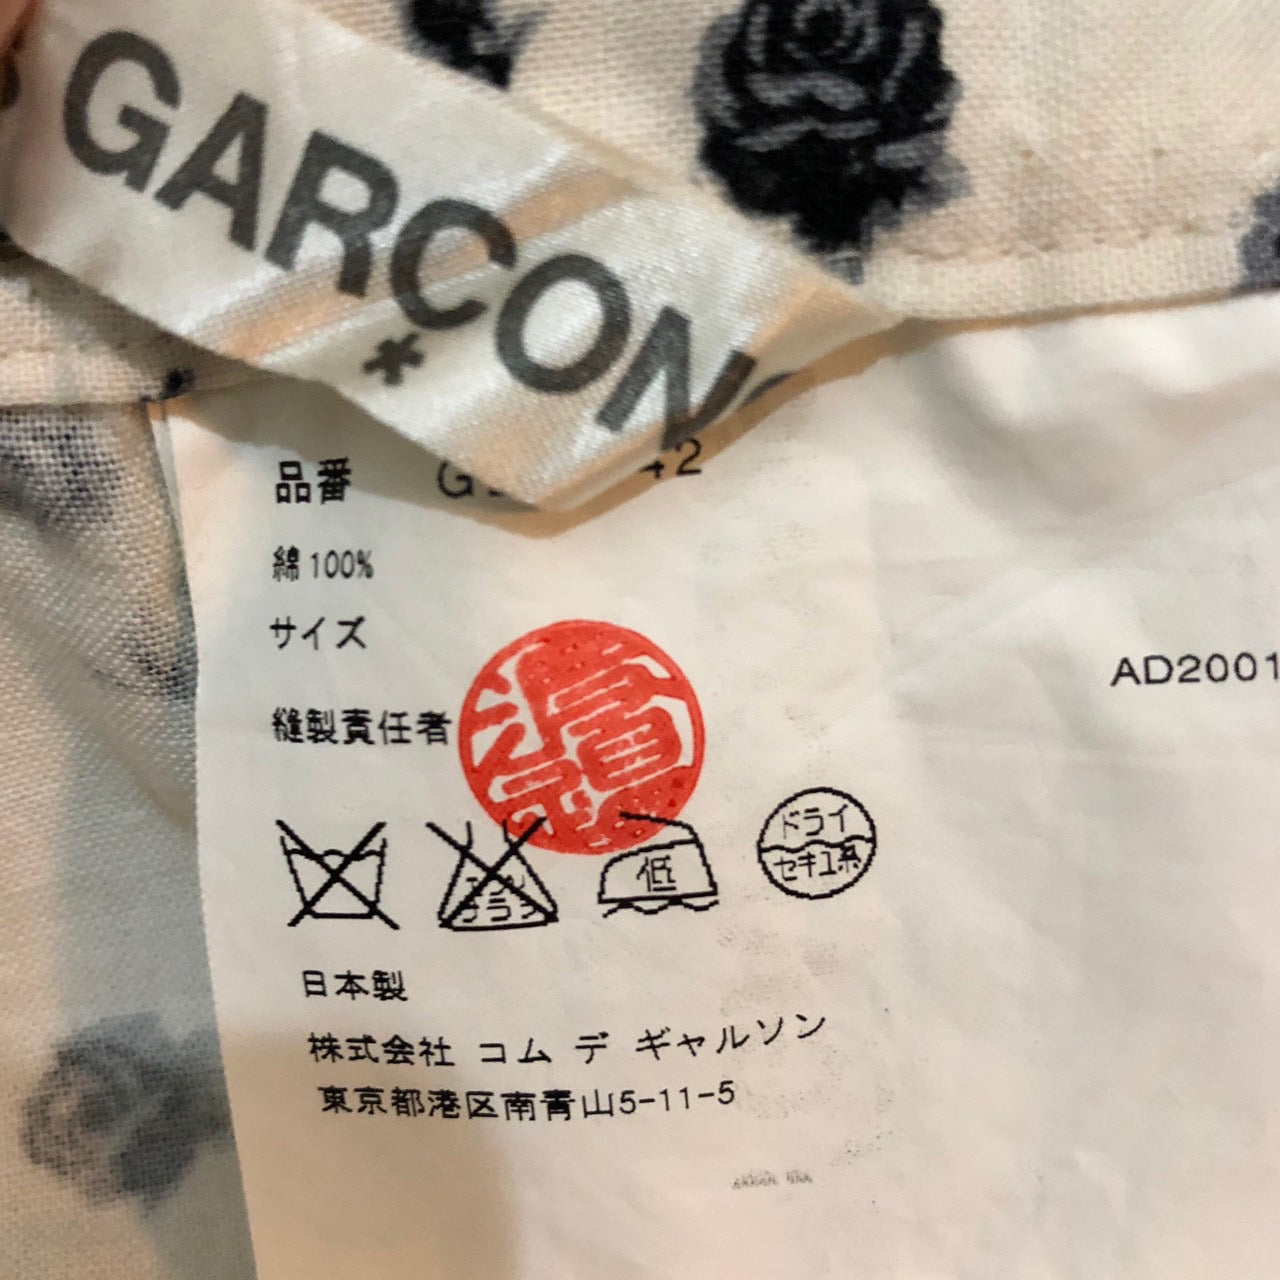 COMME des GARCONS(コムデギャルソン) 02SSフラワープリント巻き 